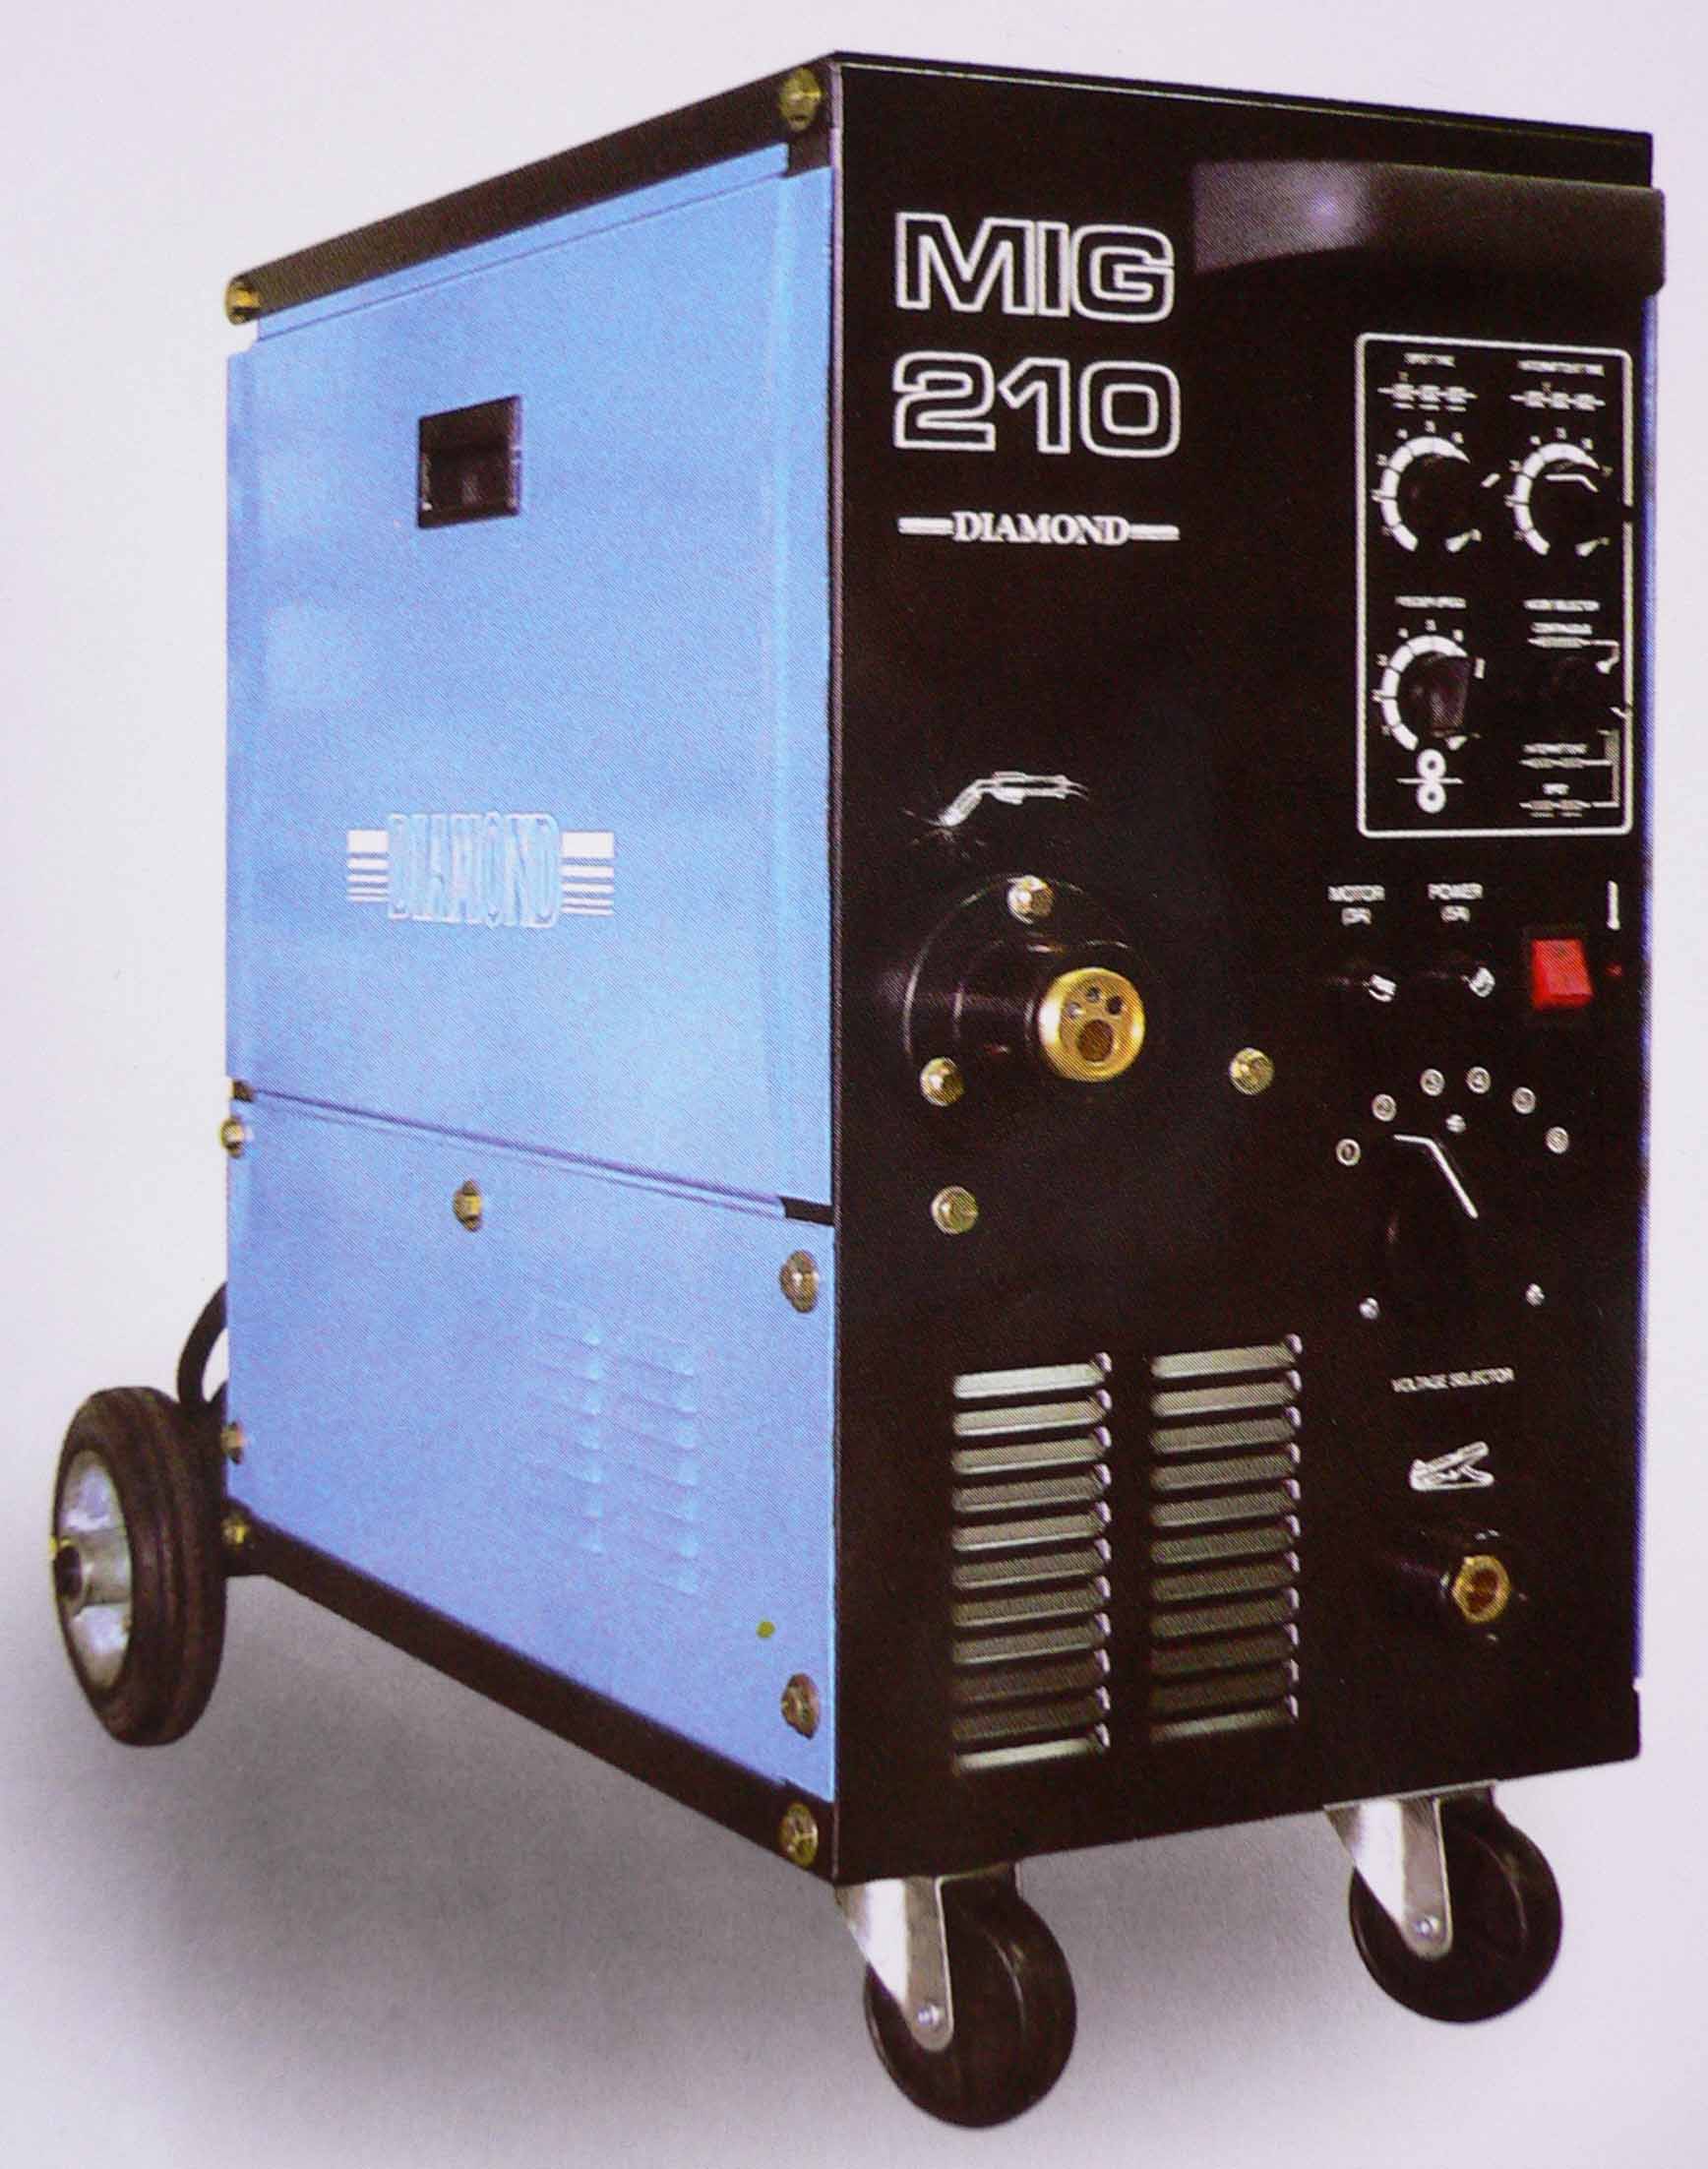 The MIG 210 has been developed to provide high quality arc welding for the light production and metal fabrication industry. It has a high reliability electronic control unit for a maximum consistency, together with a bank of high quality capacitors for maximizing power output. It has a 6 steps voltage selector, and the welding current ranges from 50A ~ 210A. A thermostat is designed in this unit for overload protection.